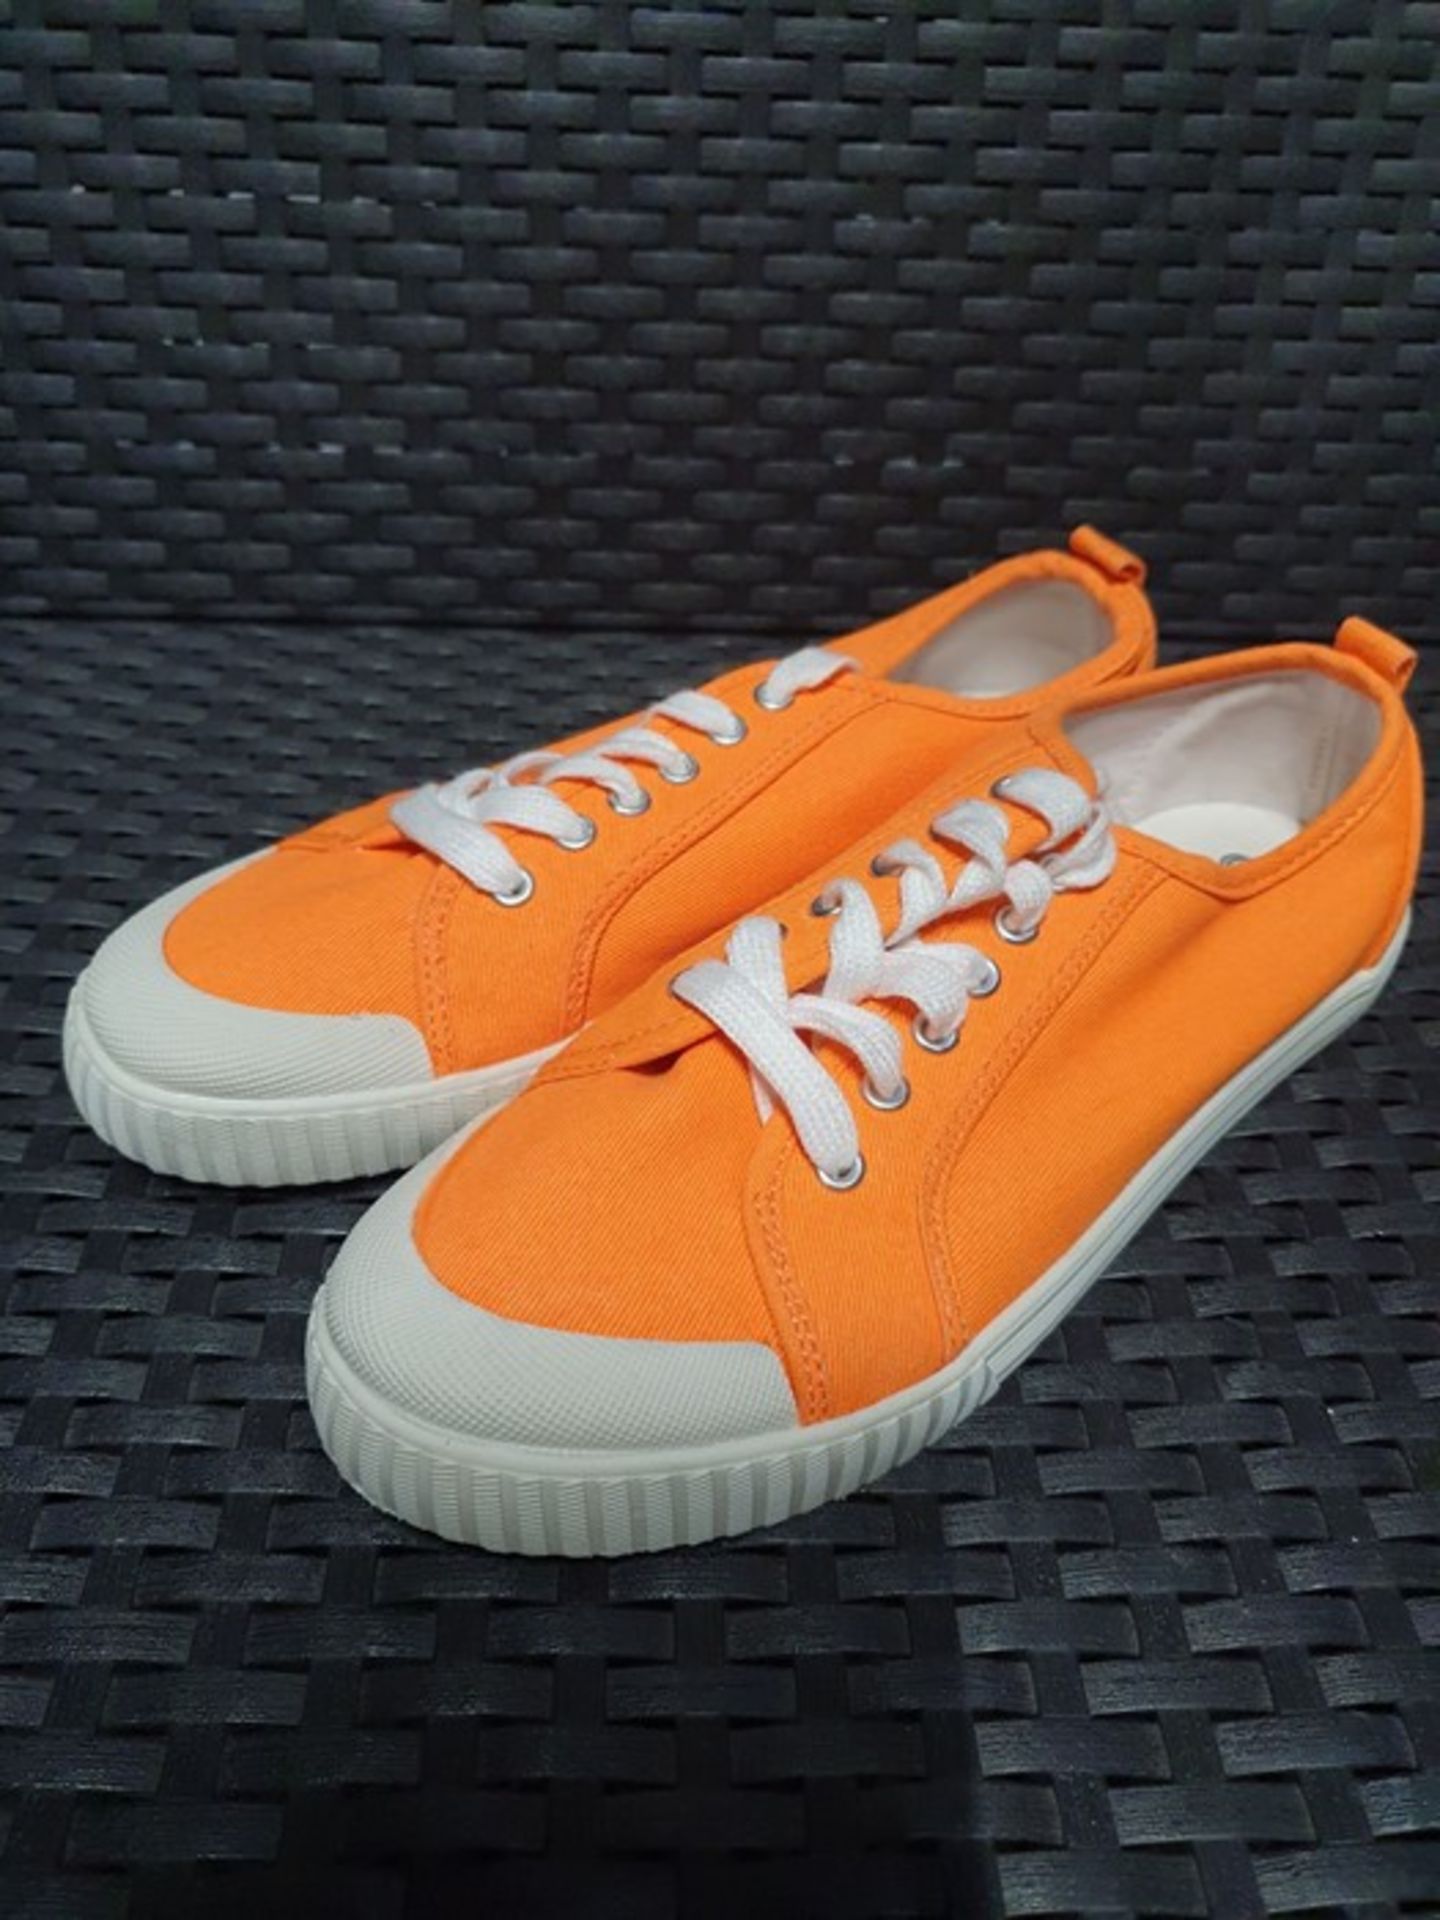 ONE PAIR OF LA REDOUTE COLLECTIONS COLOURED CANVAS TRAINERS IN ORANGE - SIZE 5.5 UK. RRP £34.00.